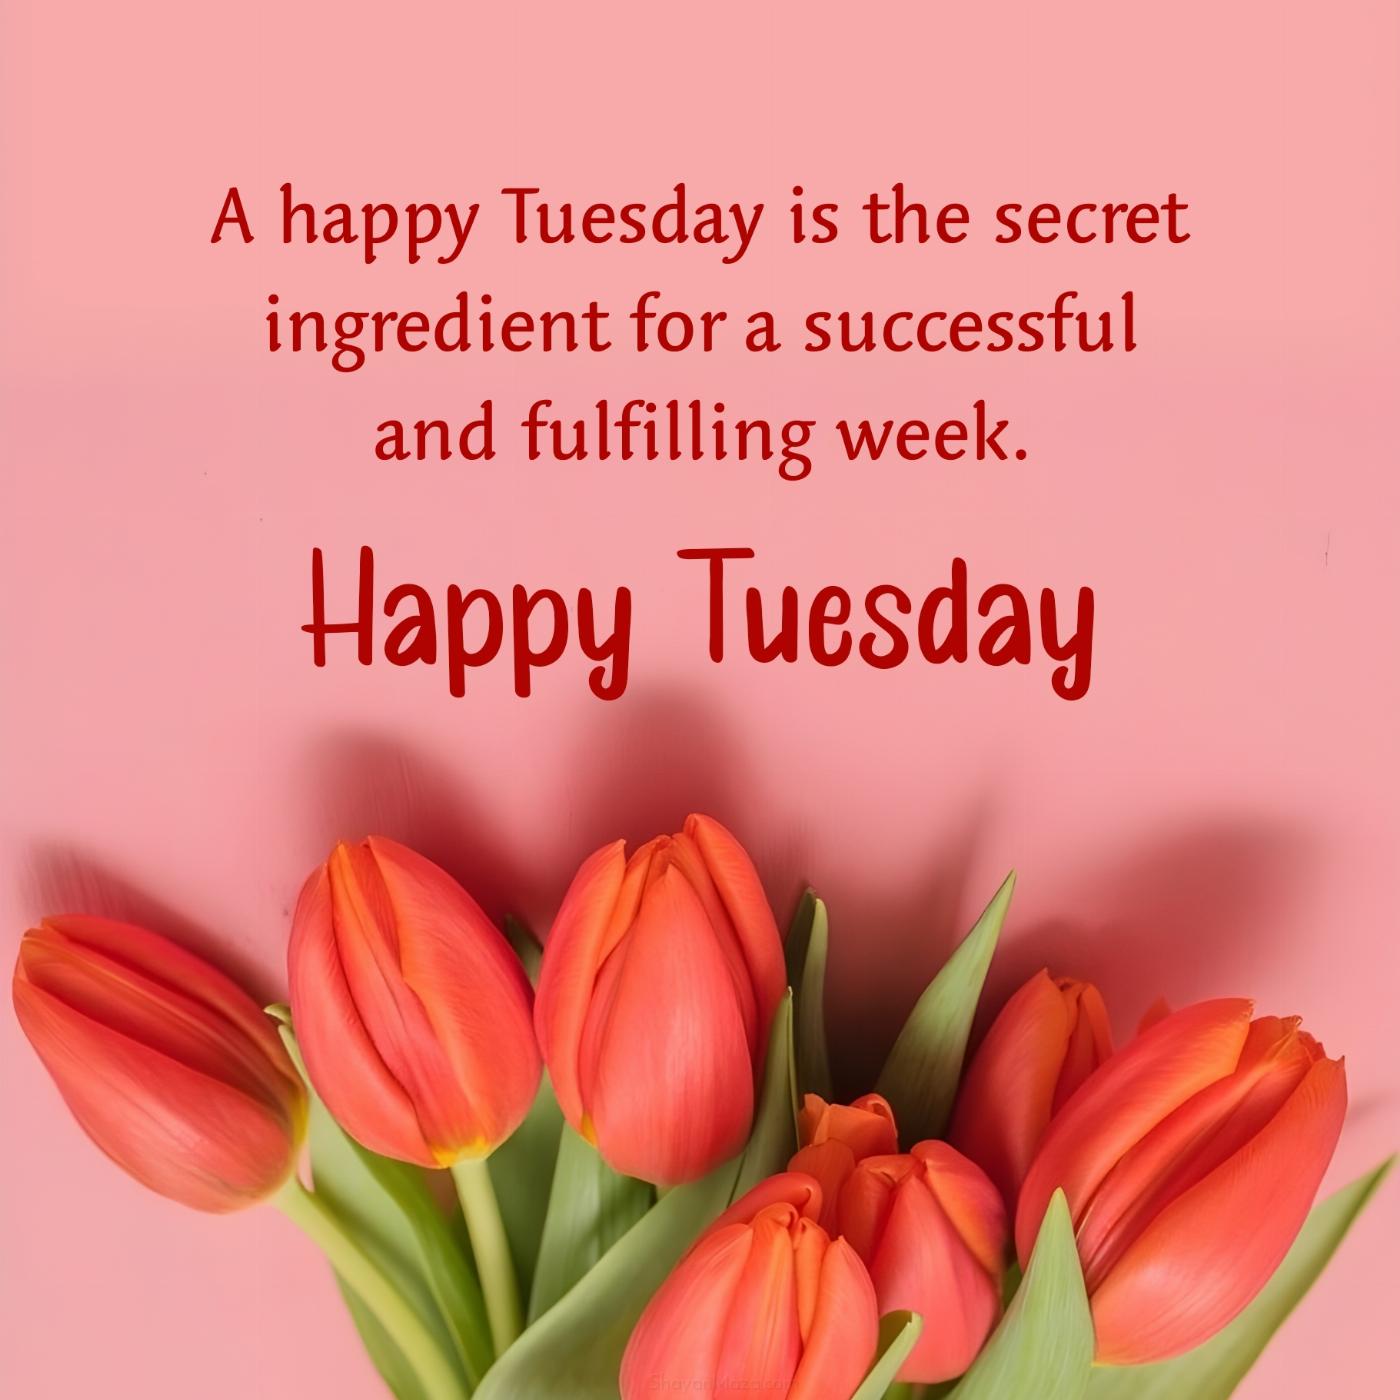 A happy Tuesday is the secret ingredient for a successful